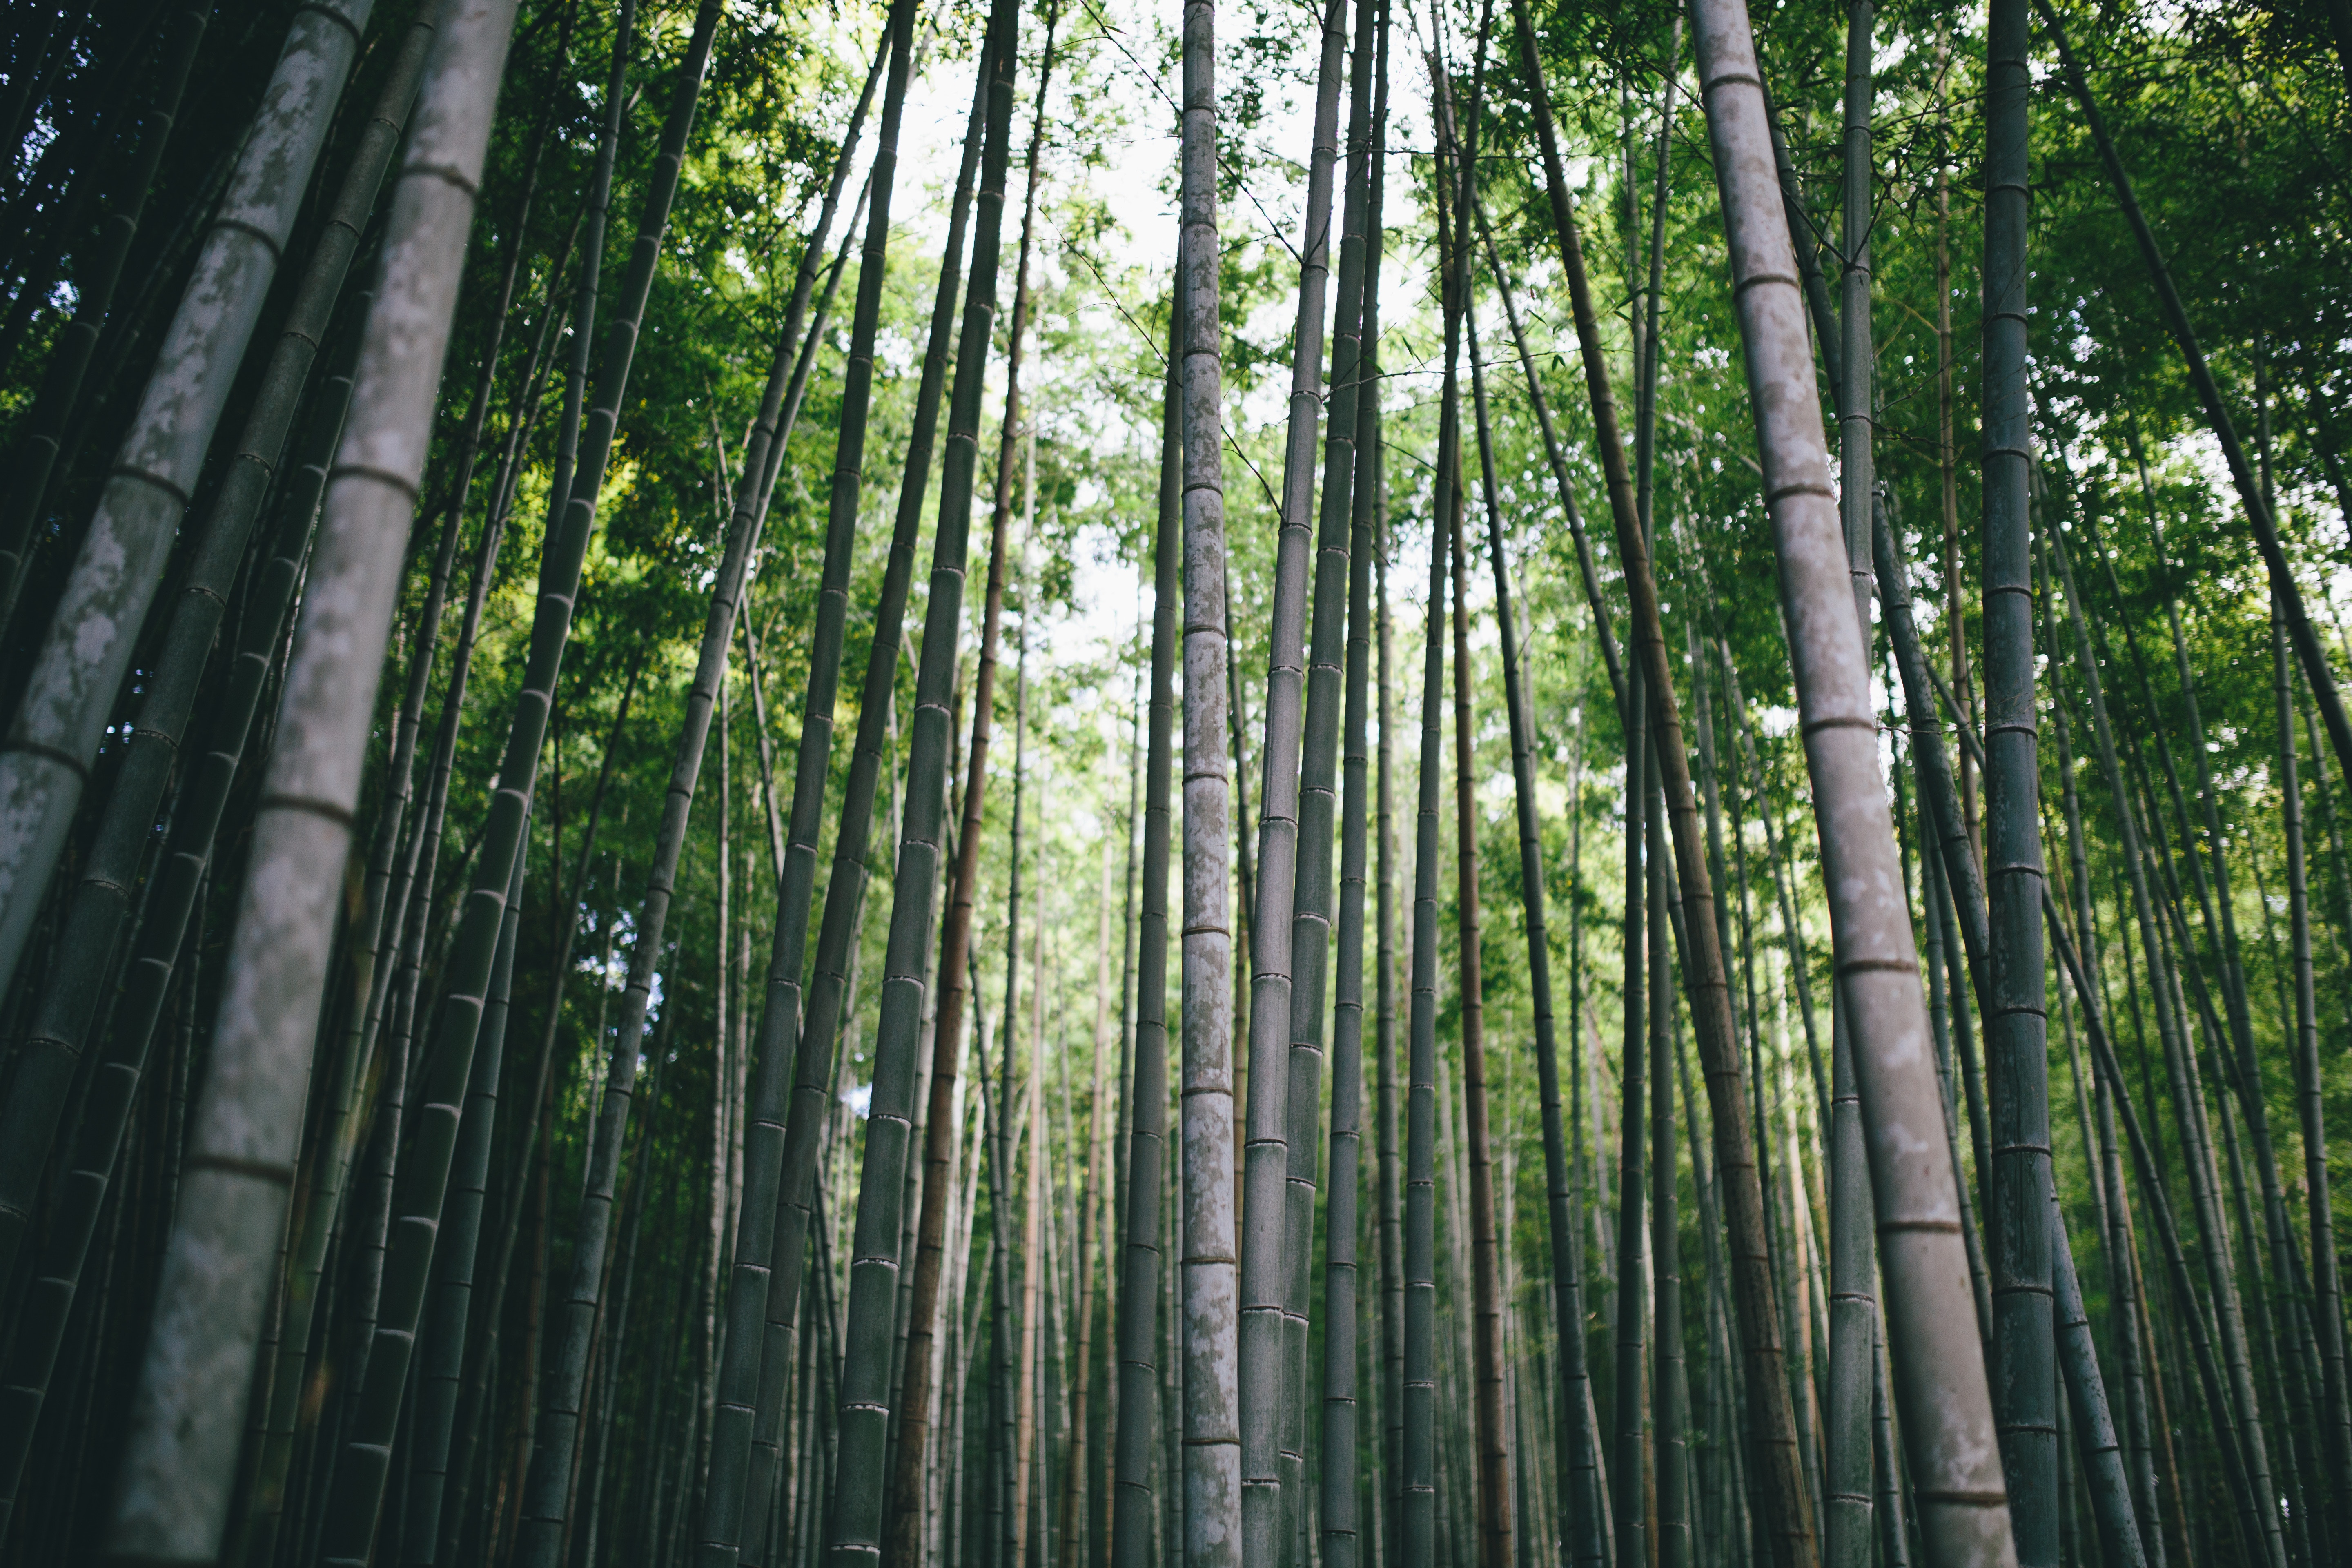 General 5760x3840 Greg Shield photography landscape nature forest bamboo Japan Asia zen